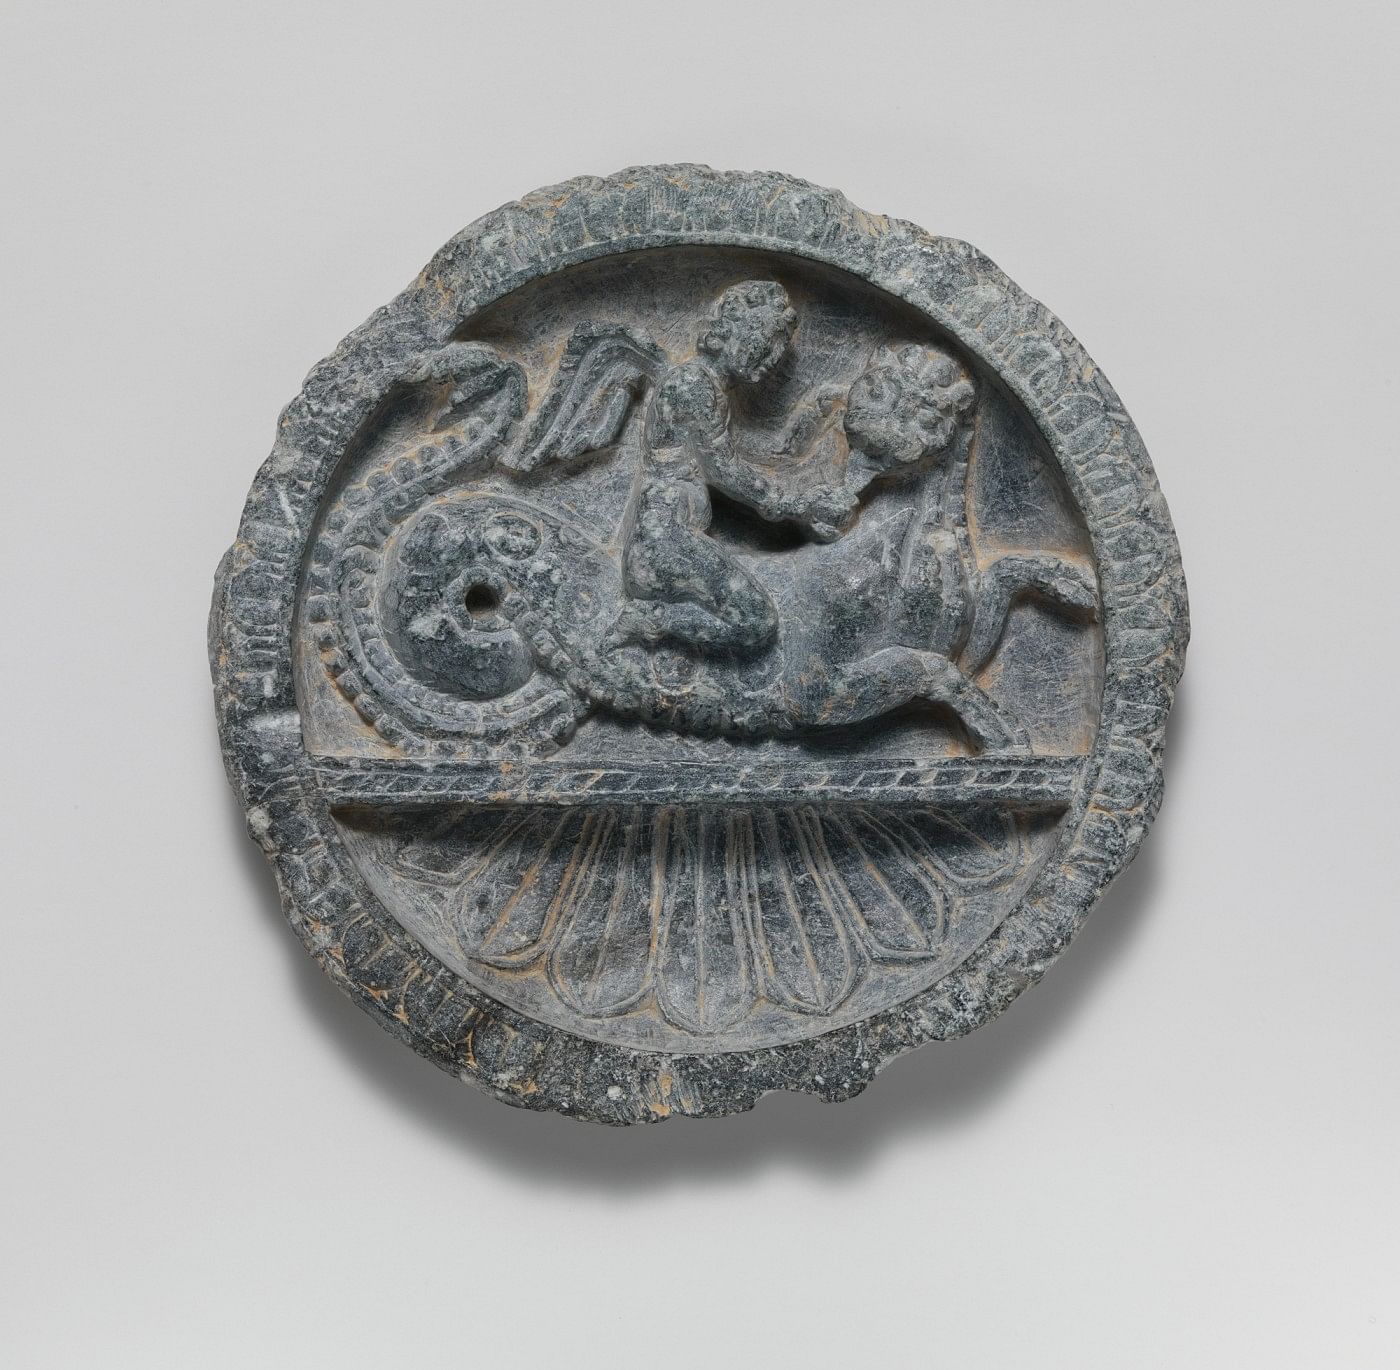 Dish with Winged Eros Riding a Lion-Headed Sea Monster, Pakistan (ancient region of Gandhara), 1st century BCE, Schist, 15.2 x 2.5 cm, Image courtesy of The Metropolitan Museum of Art, New York